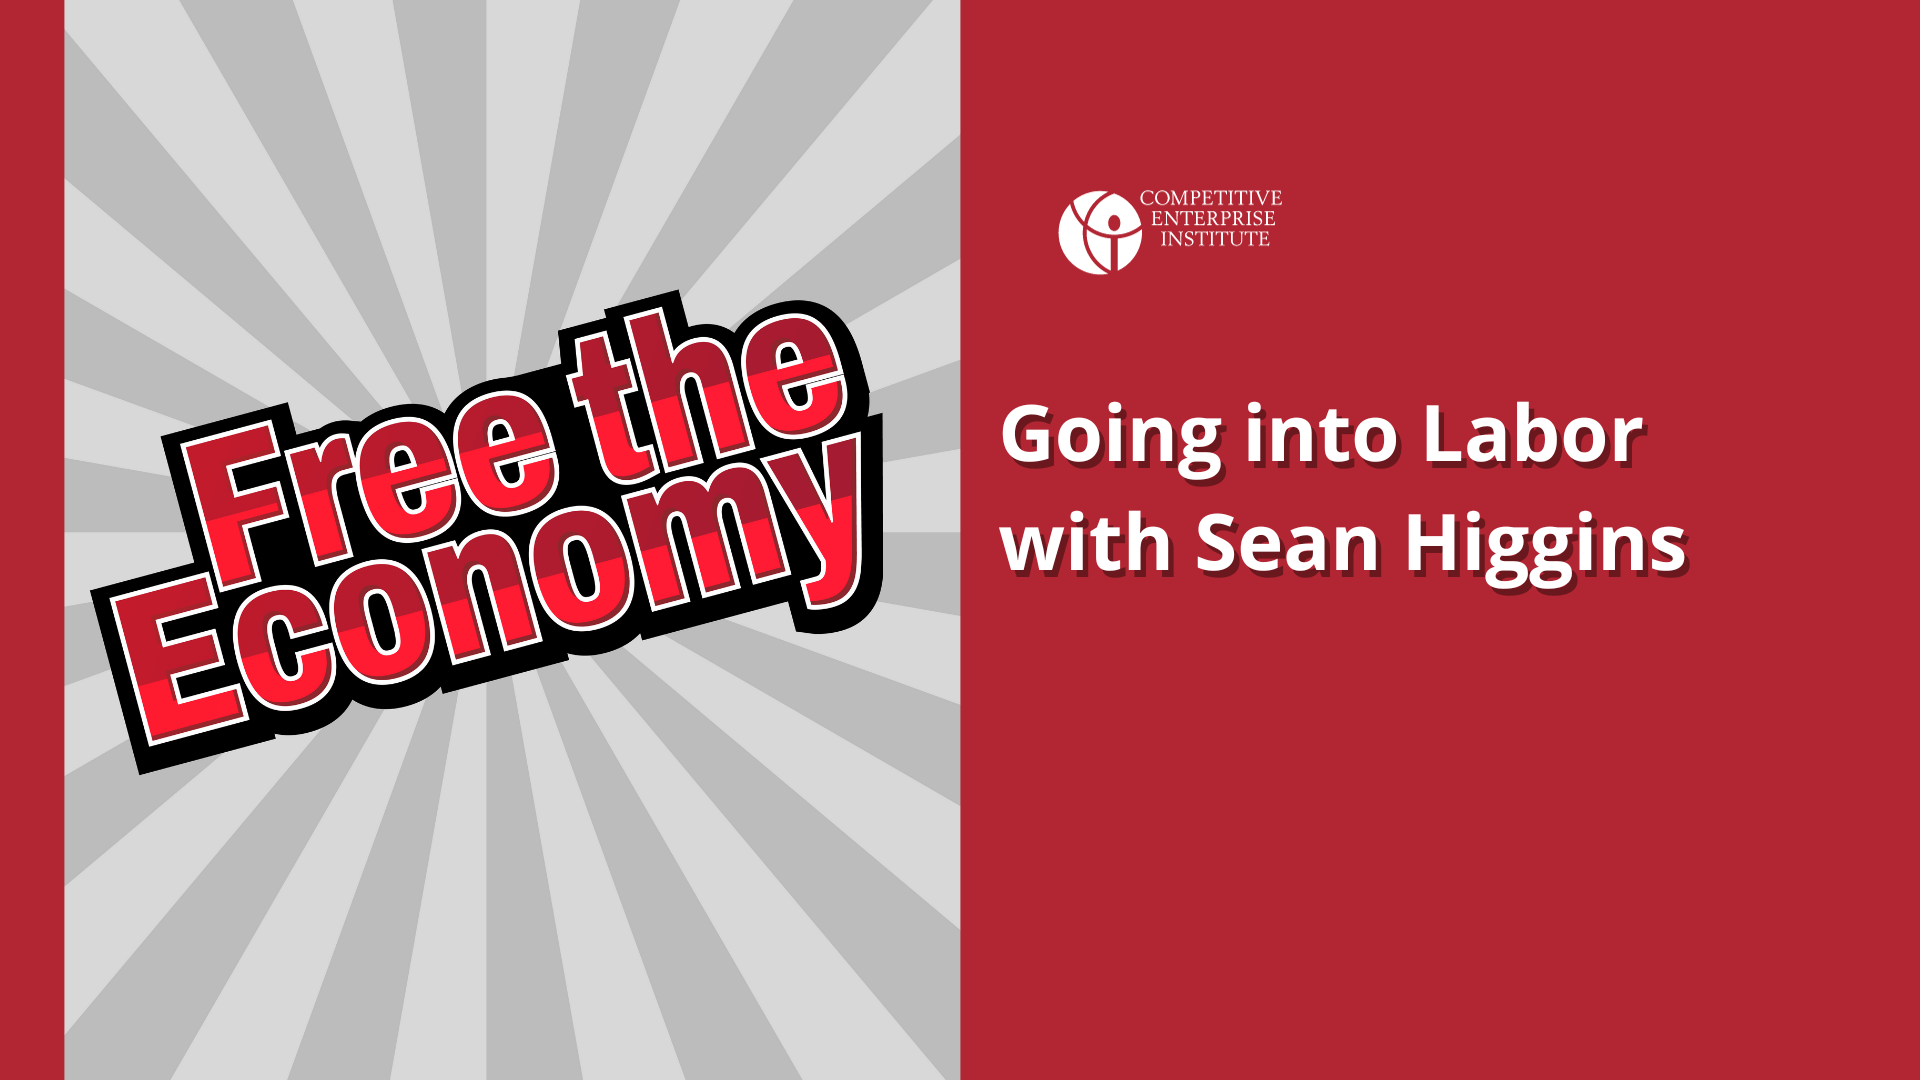 Going into Labor with Sean Higgins